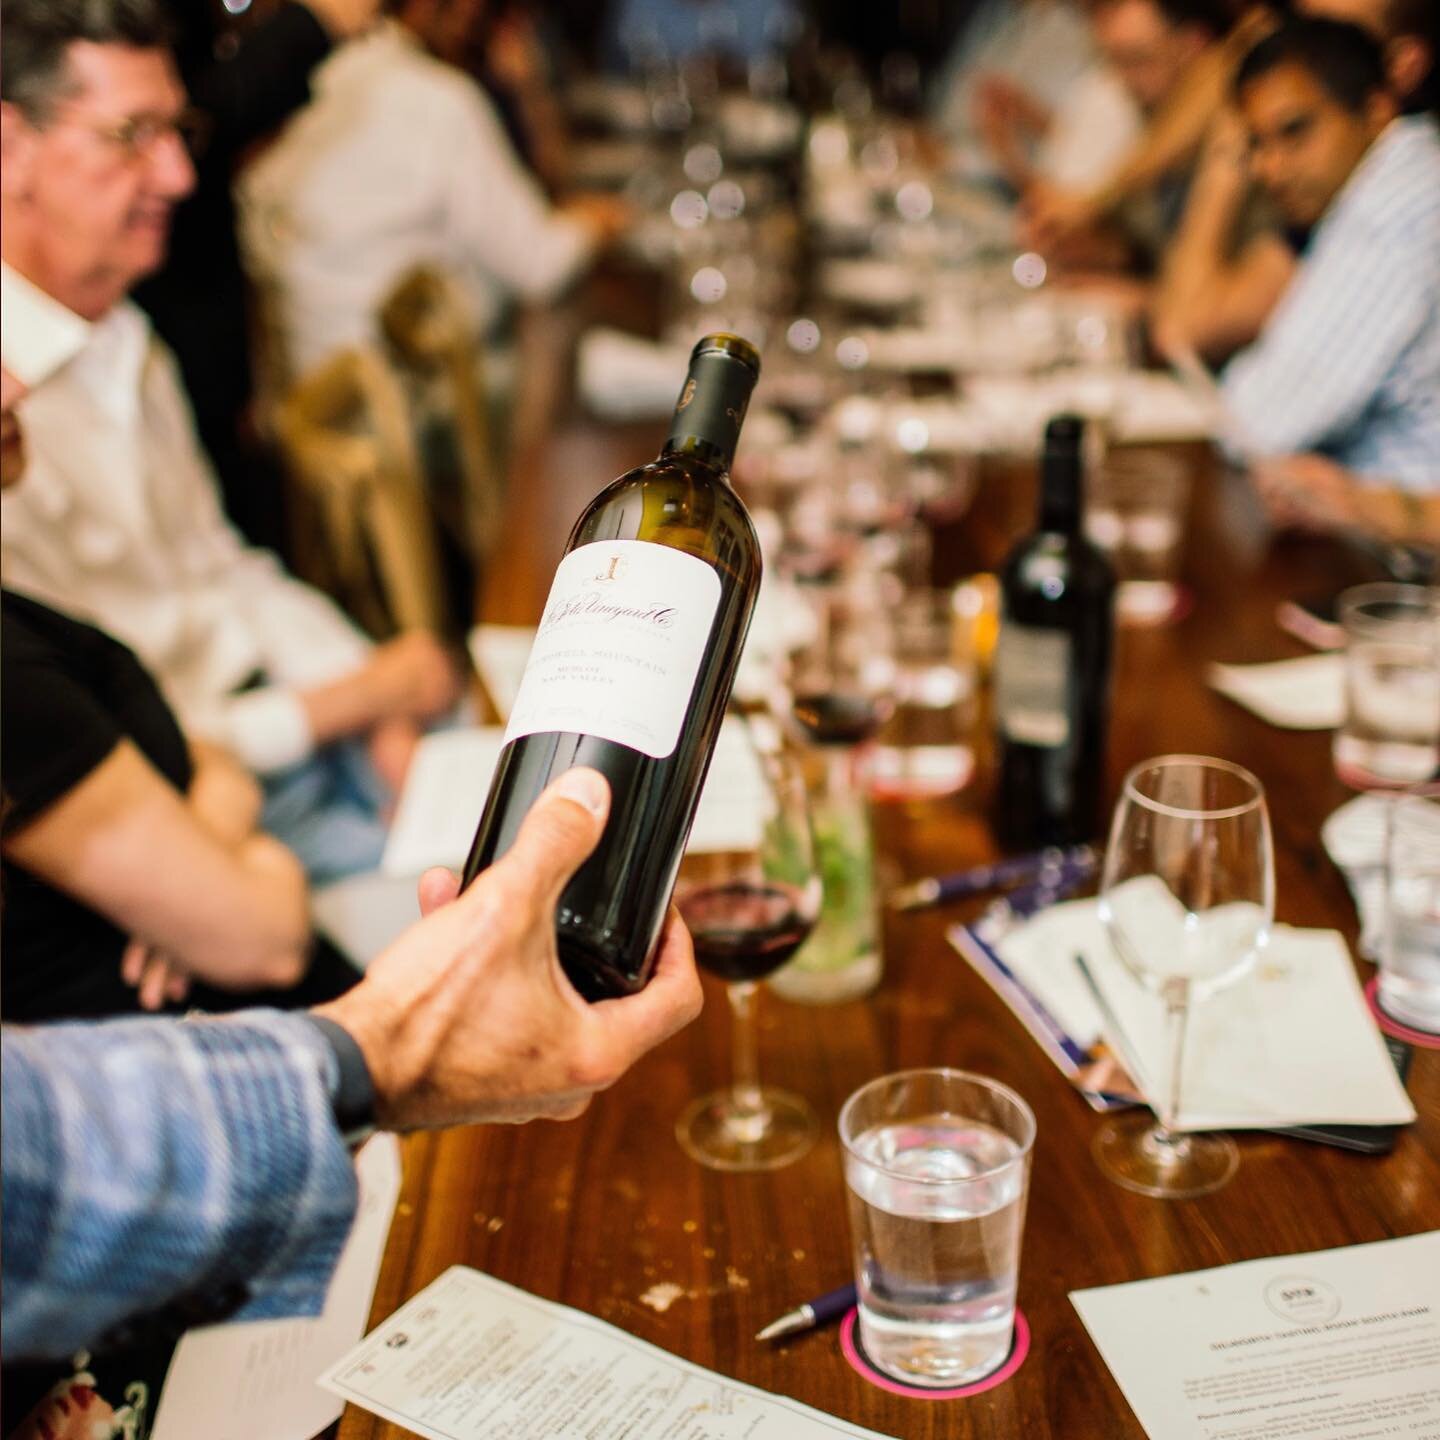 #CLTWineandFood Week presented by @truist held a restaurant vintner dinner at @dilworth_tasting_room - Southpark featuring @spirecollection - a luxury-driven division representing the artisan brands from @jacksonfamilywines. The special guests of the